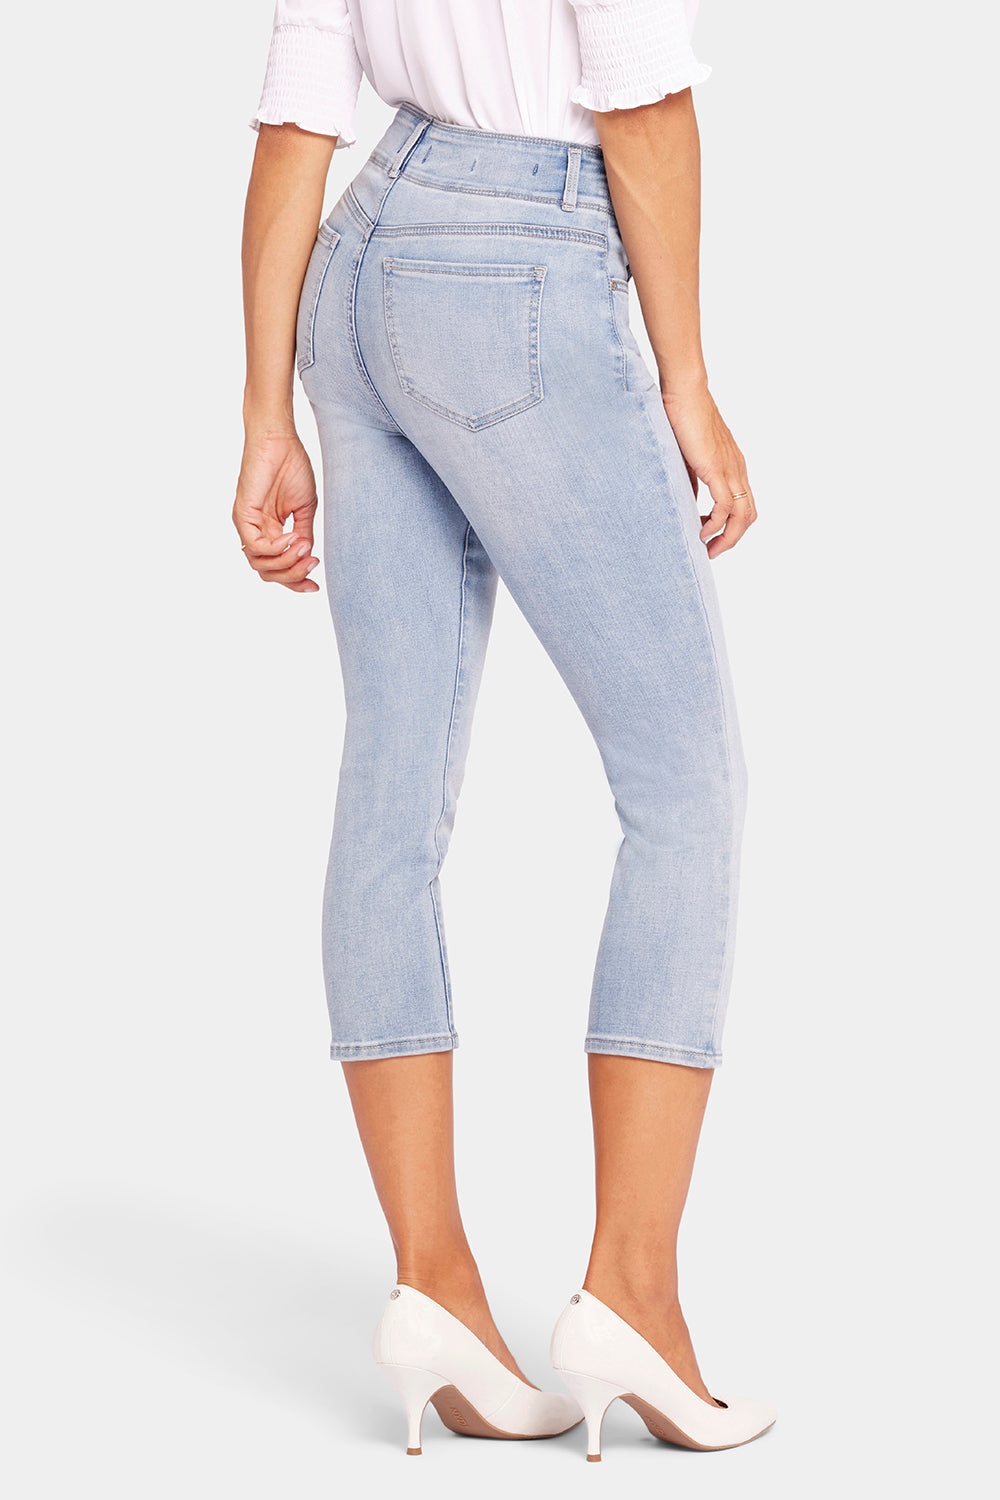 NYDJ Ami Skinny Capri Jeans In Petite With High Rise - Afterglow